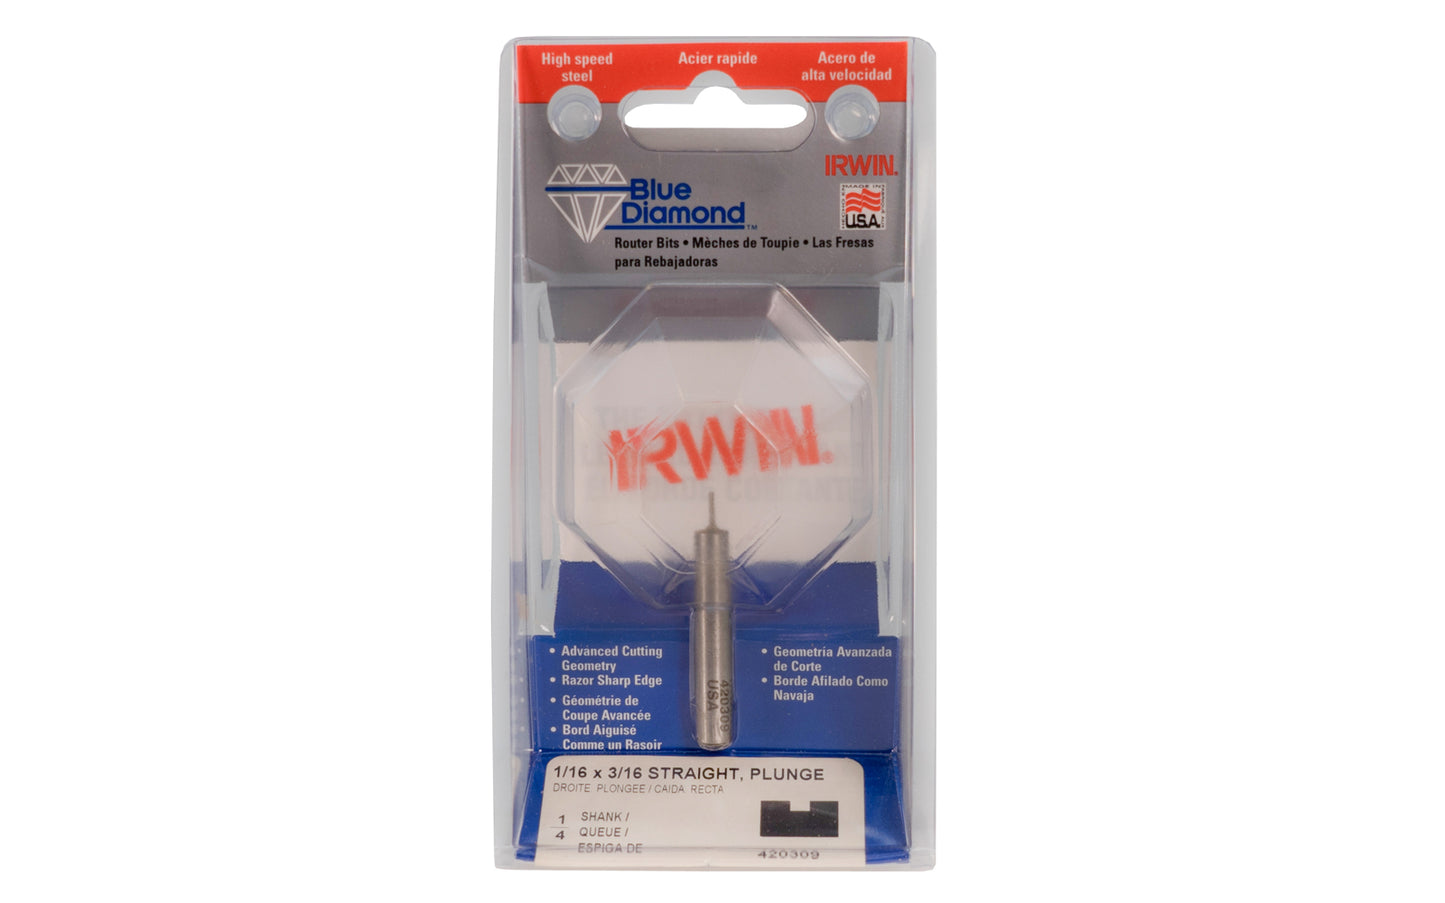 Irwin HSS 1/16" x 3/16" Straight Router Bit - Made in USA. High Speed Steel Router Bit. 3/16" depth. 1-7/8" length. Irwin Blue Diamond Model No. 420309. Made in USA.